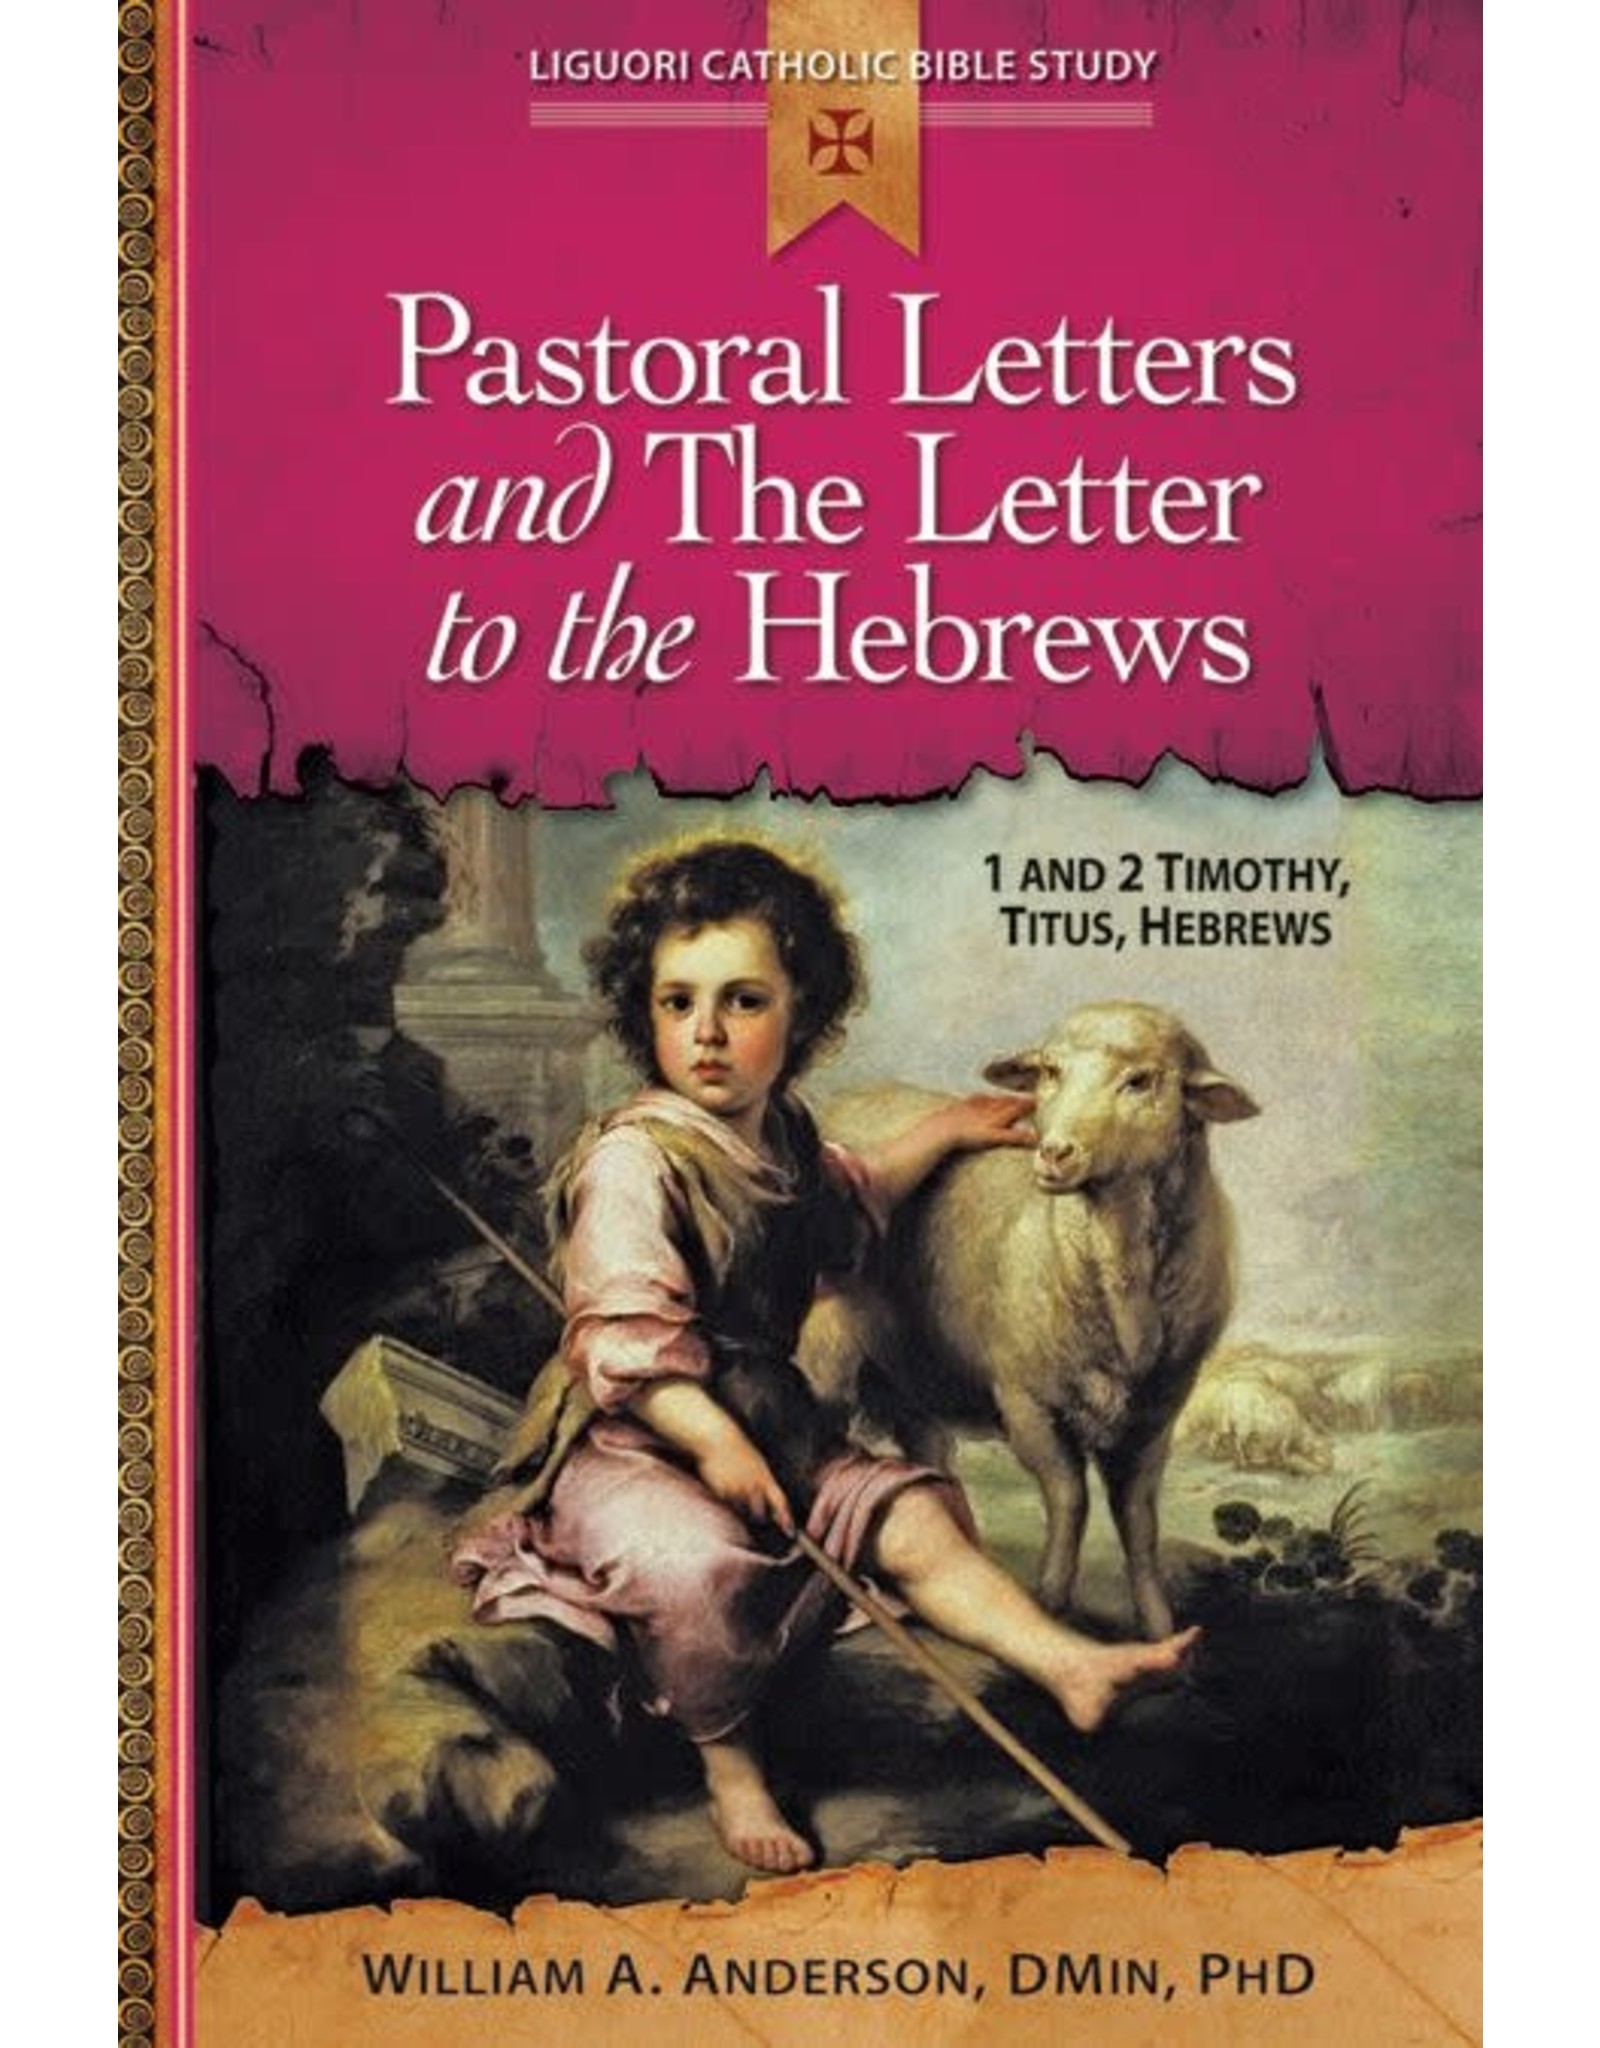 Pastoral Letters & The Letter to the Hebrews: 1 & 2 Timothy, Titus, Hebrews